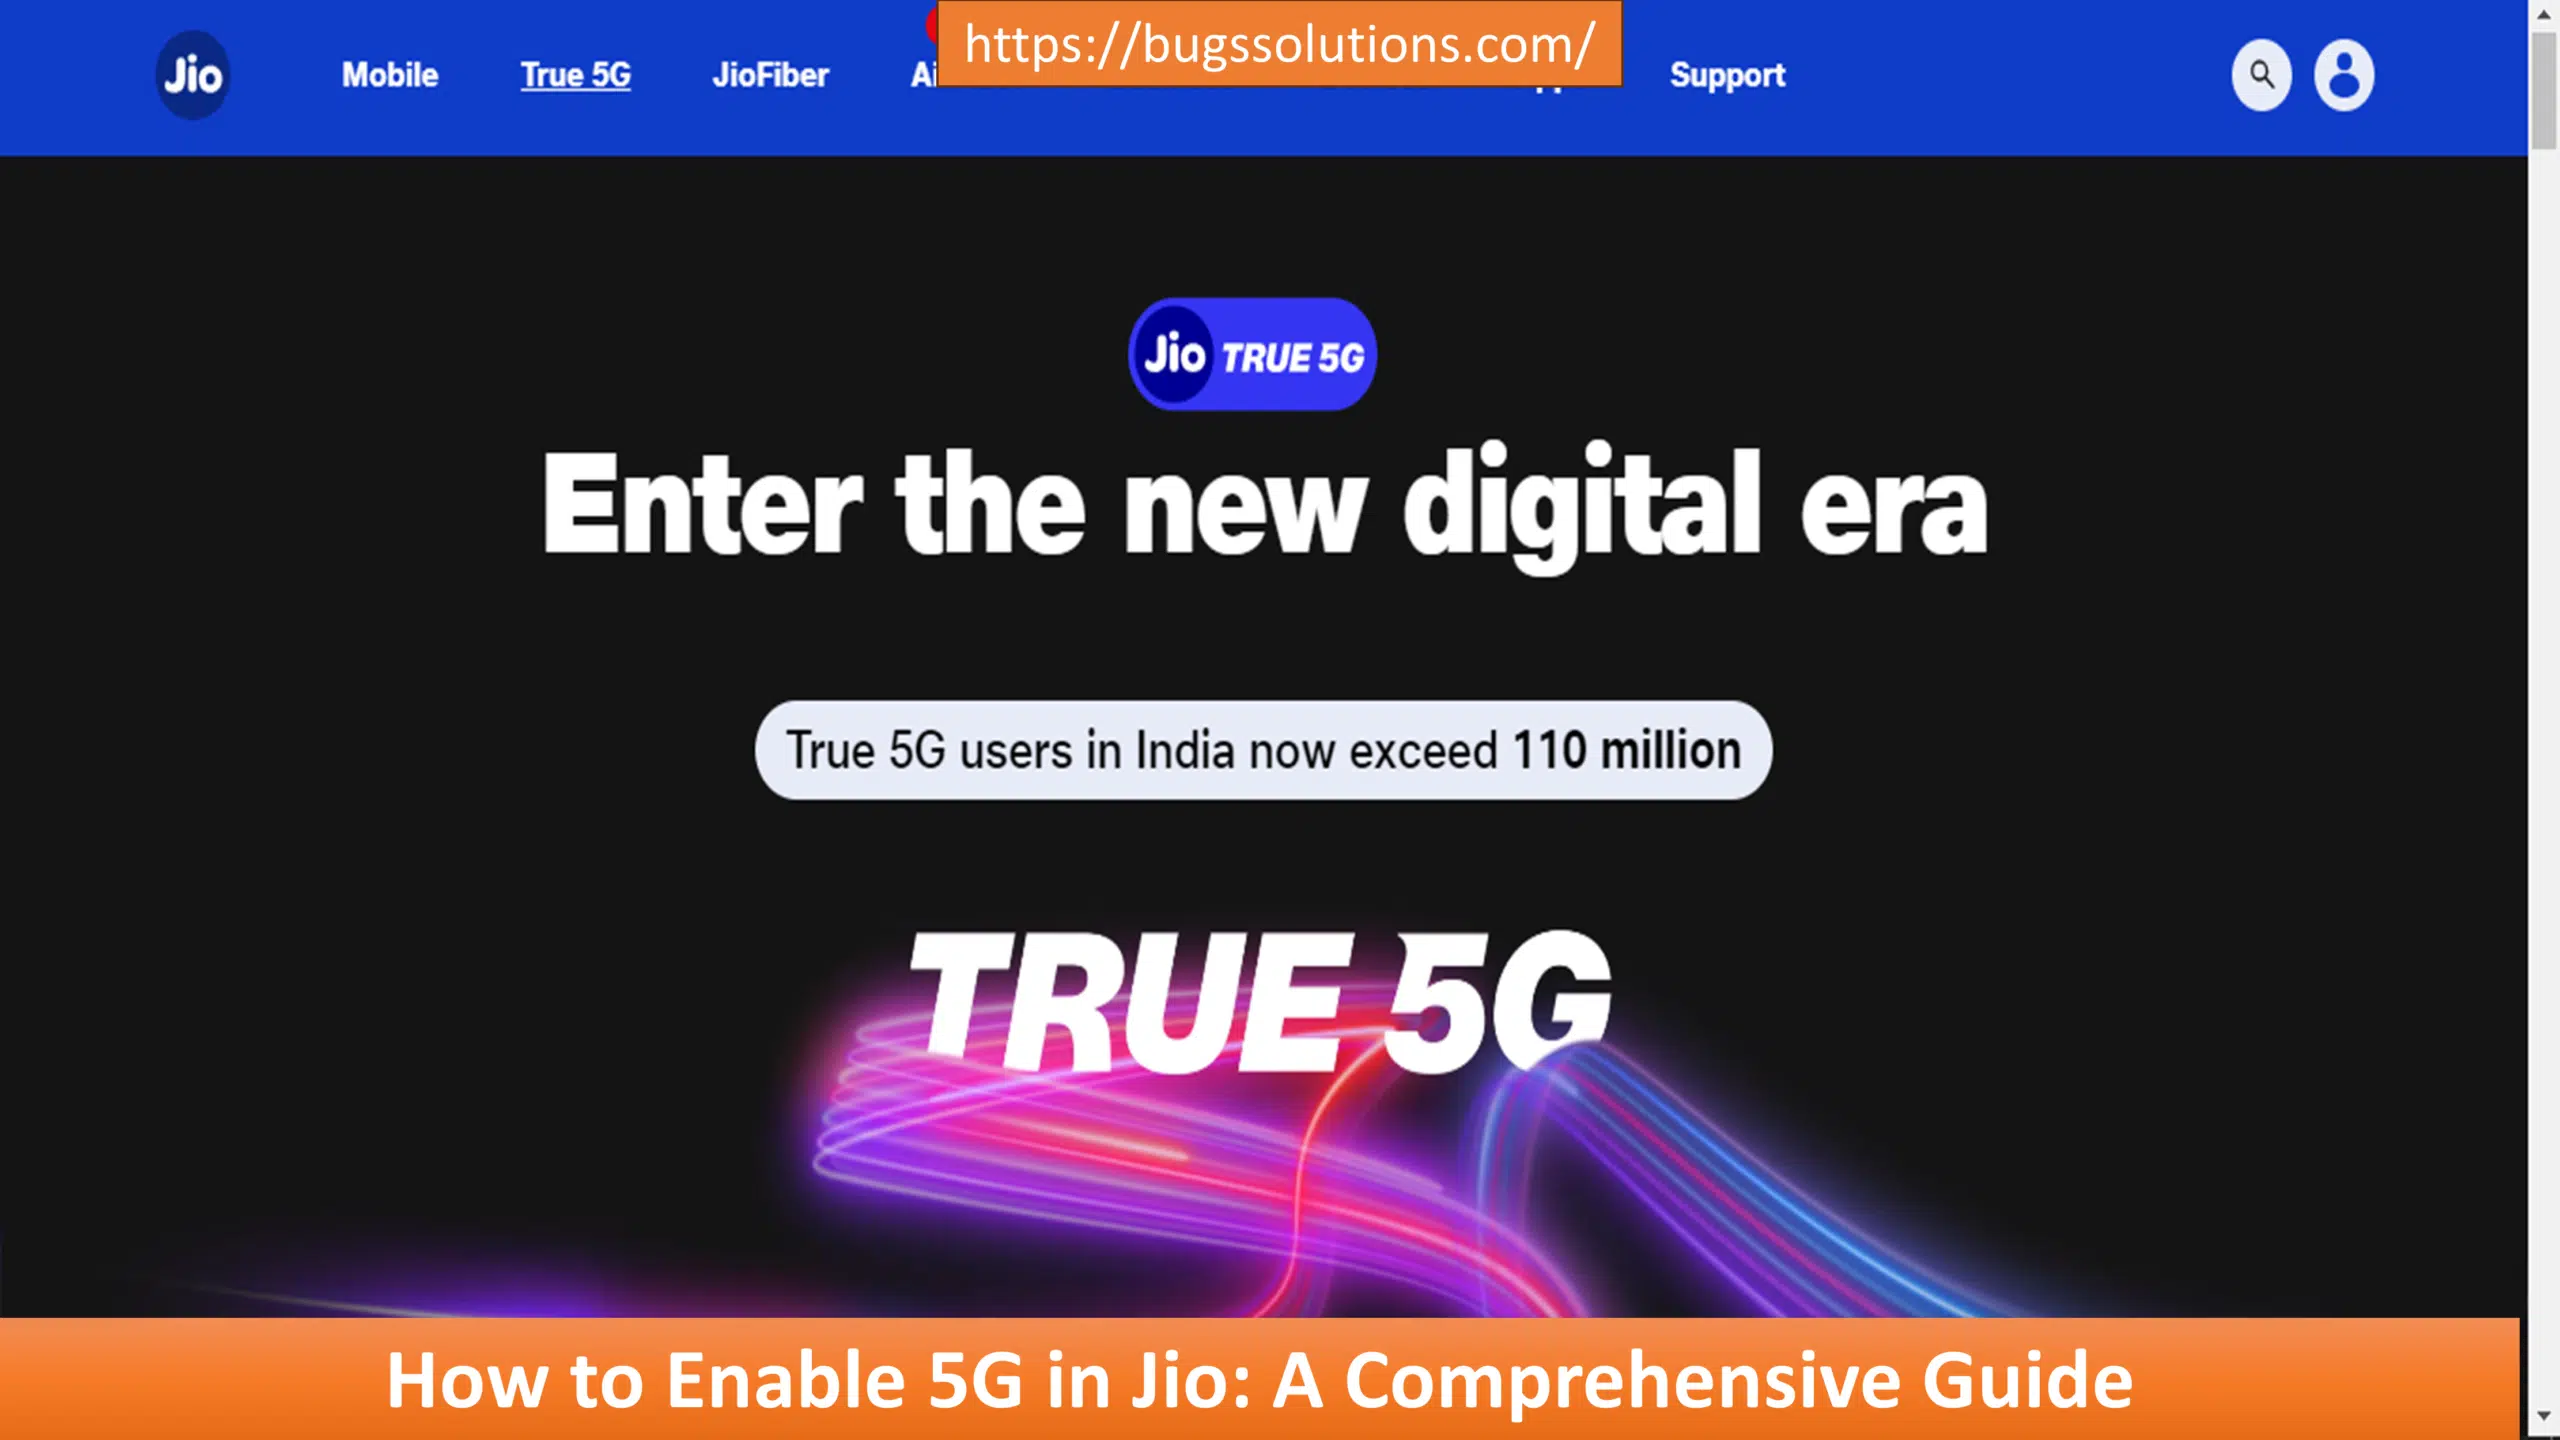 How to Enable 5G in Jio: A Comprehensive Guide